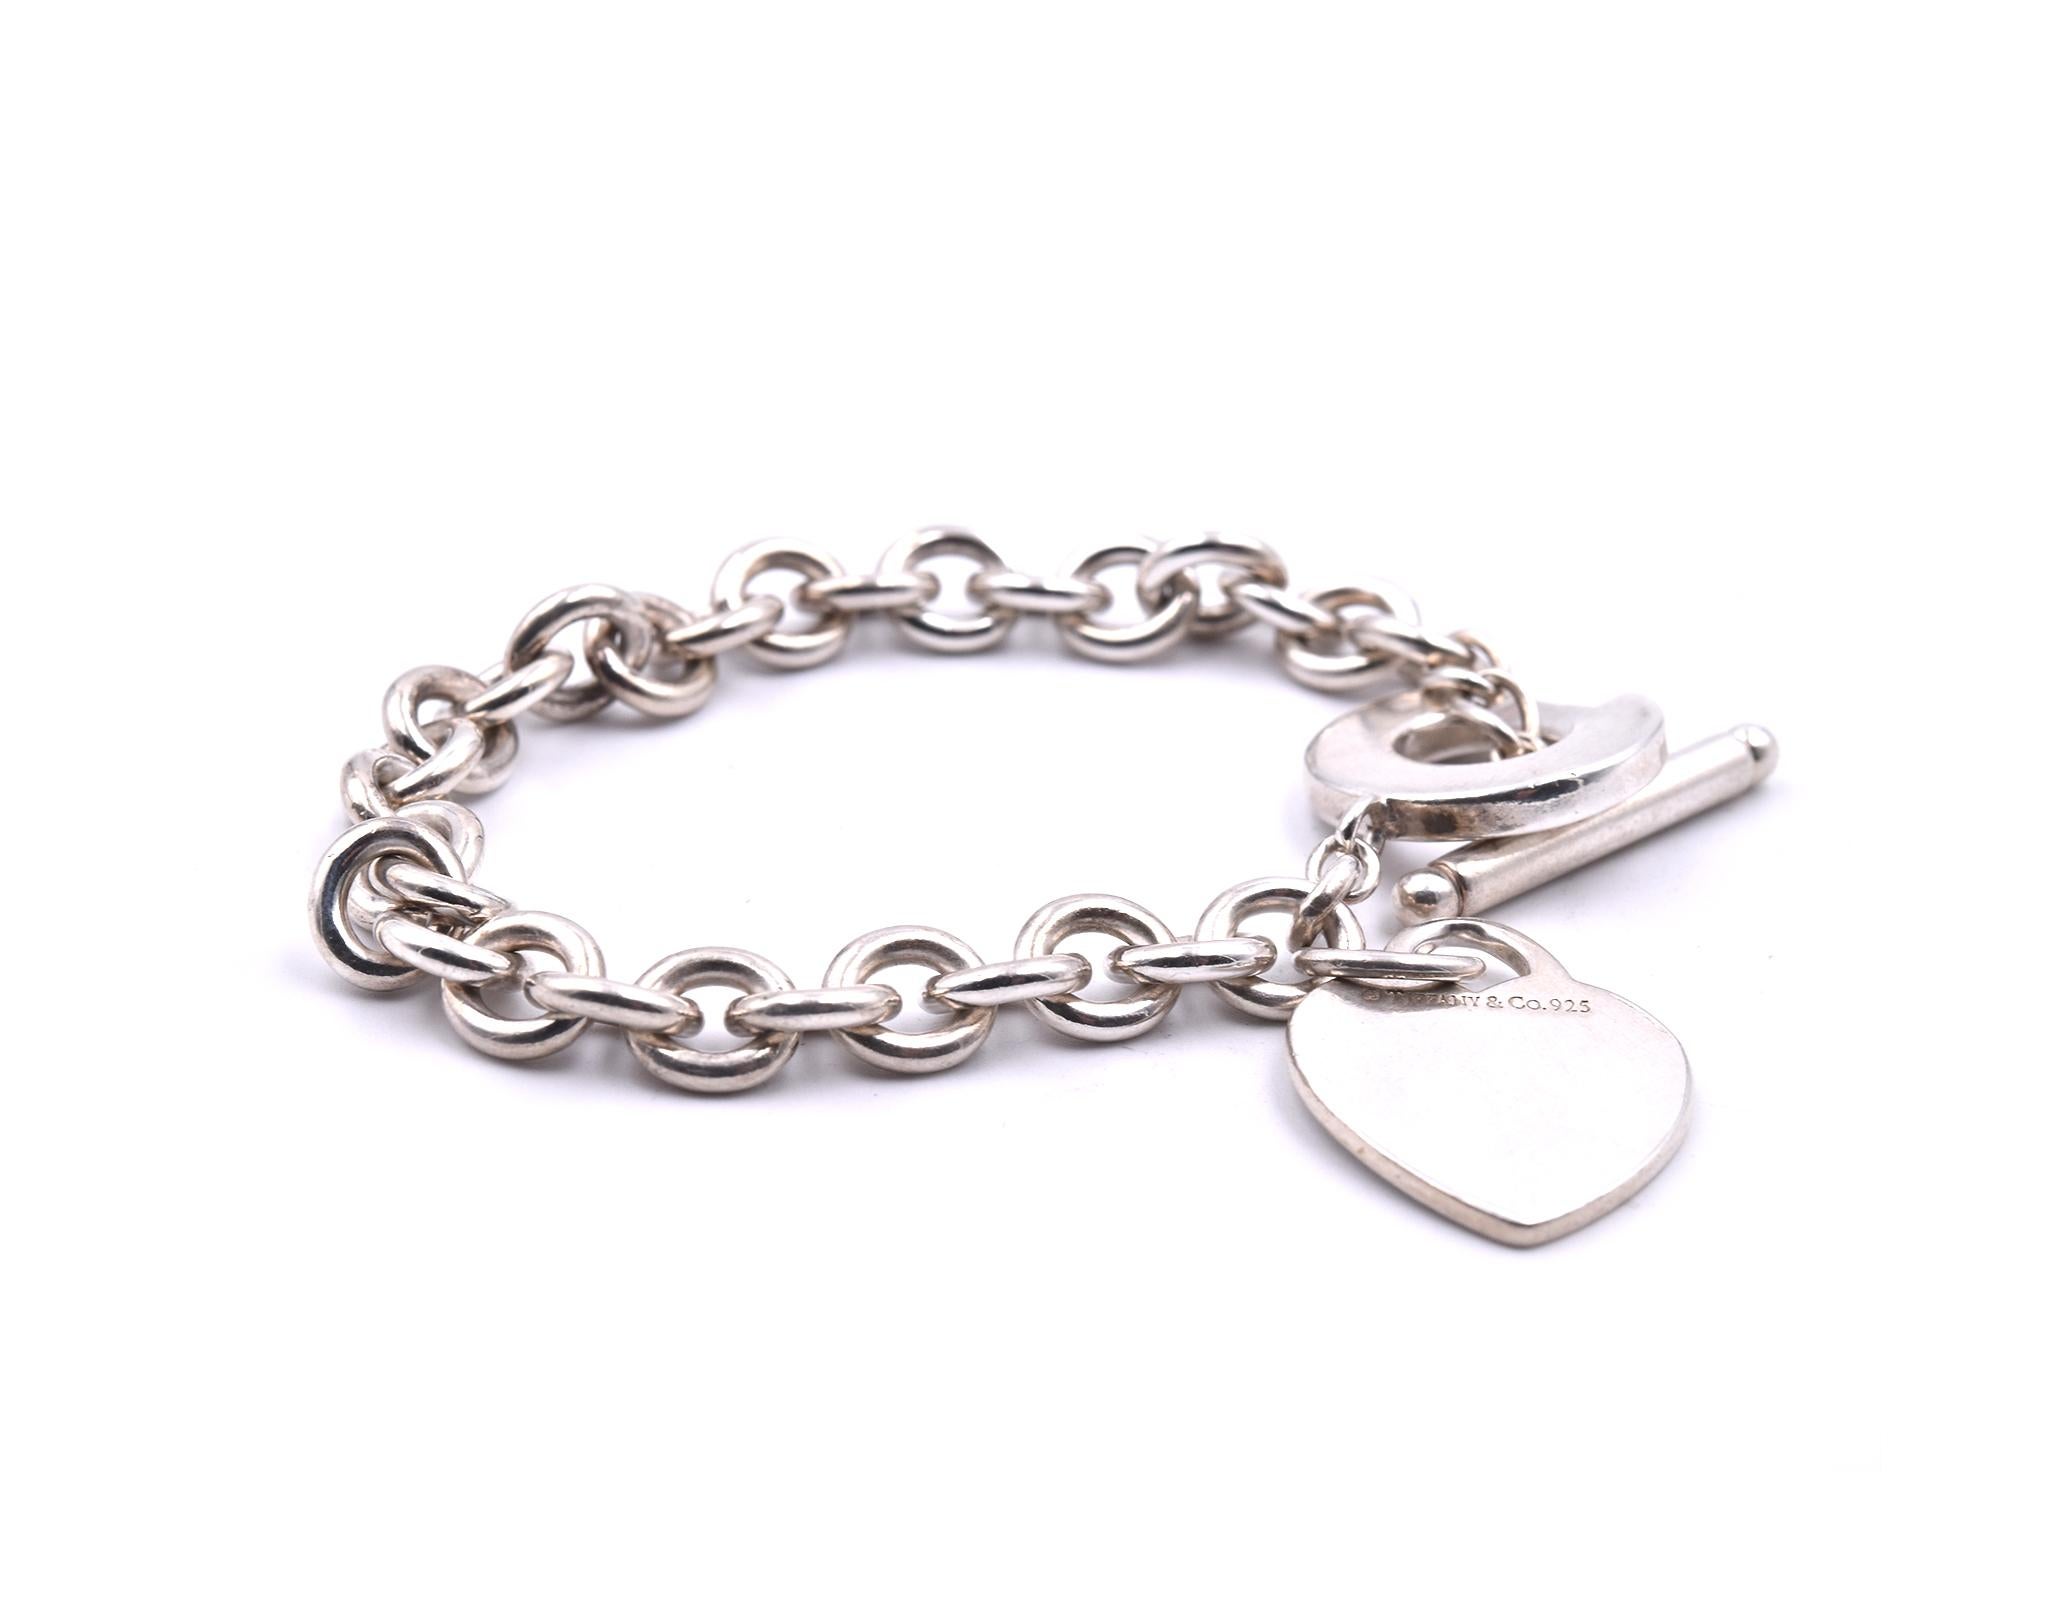 Designer: Tiffany & Co.
Material: sterling silver
Dimensions: bracelet is 16-inches long
Weight: 36.36 grams
